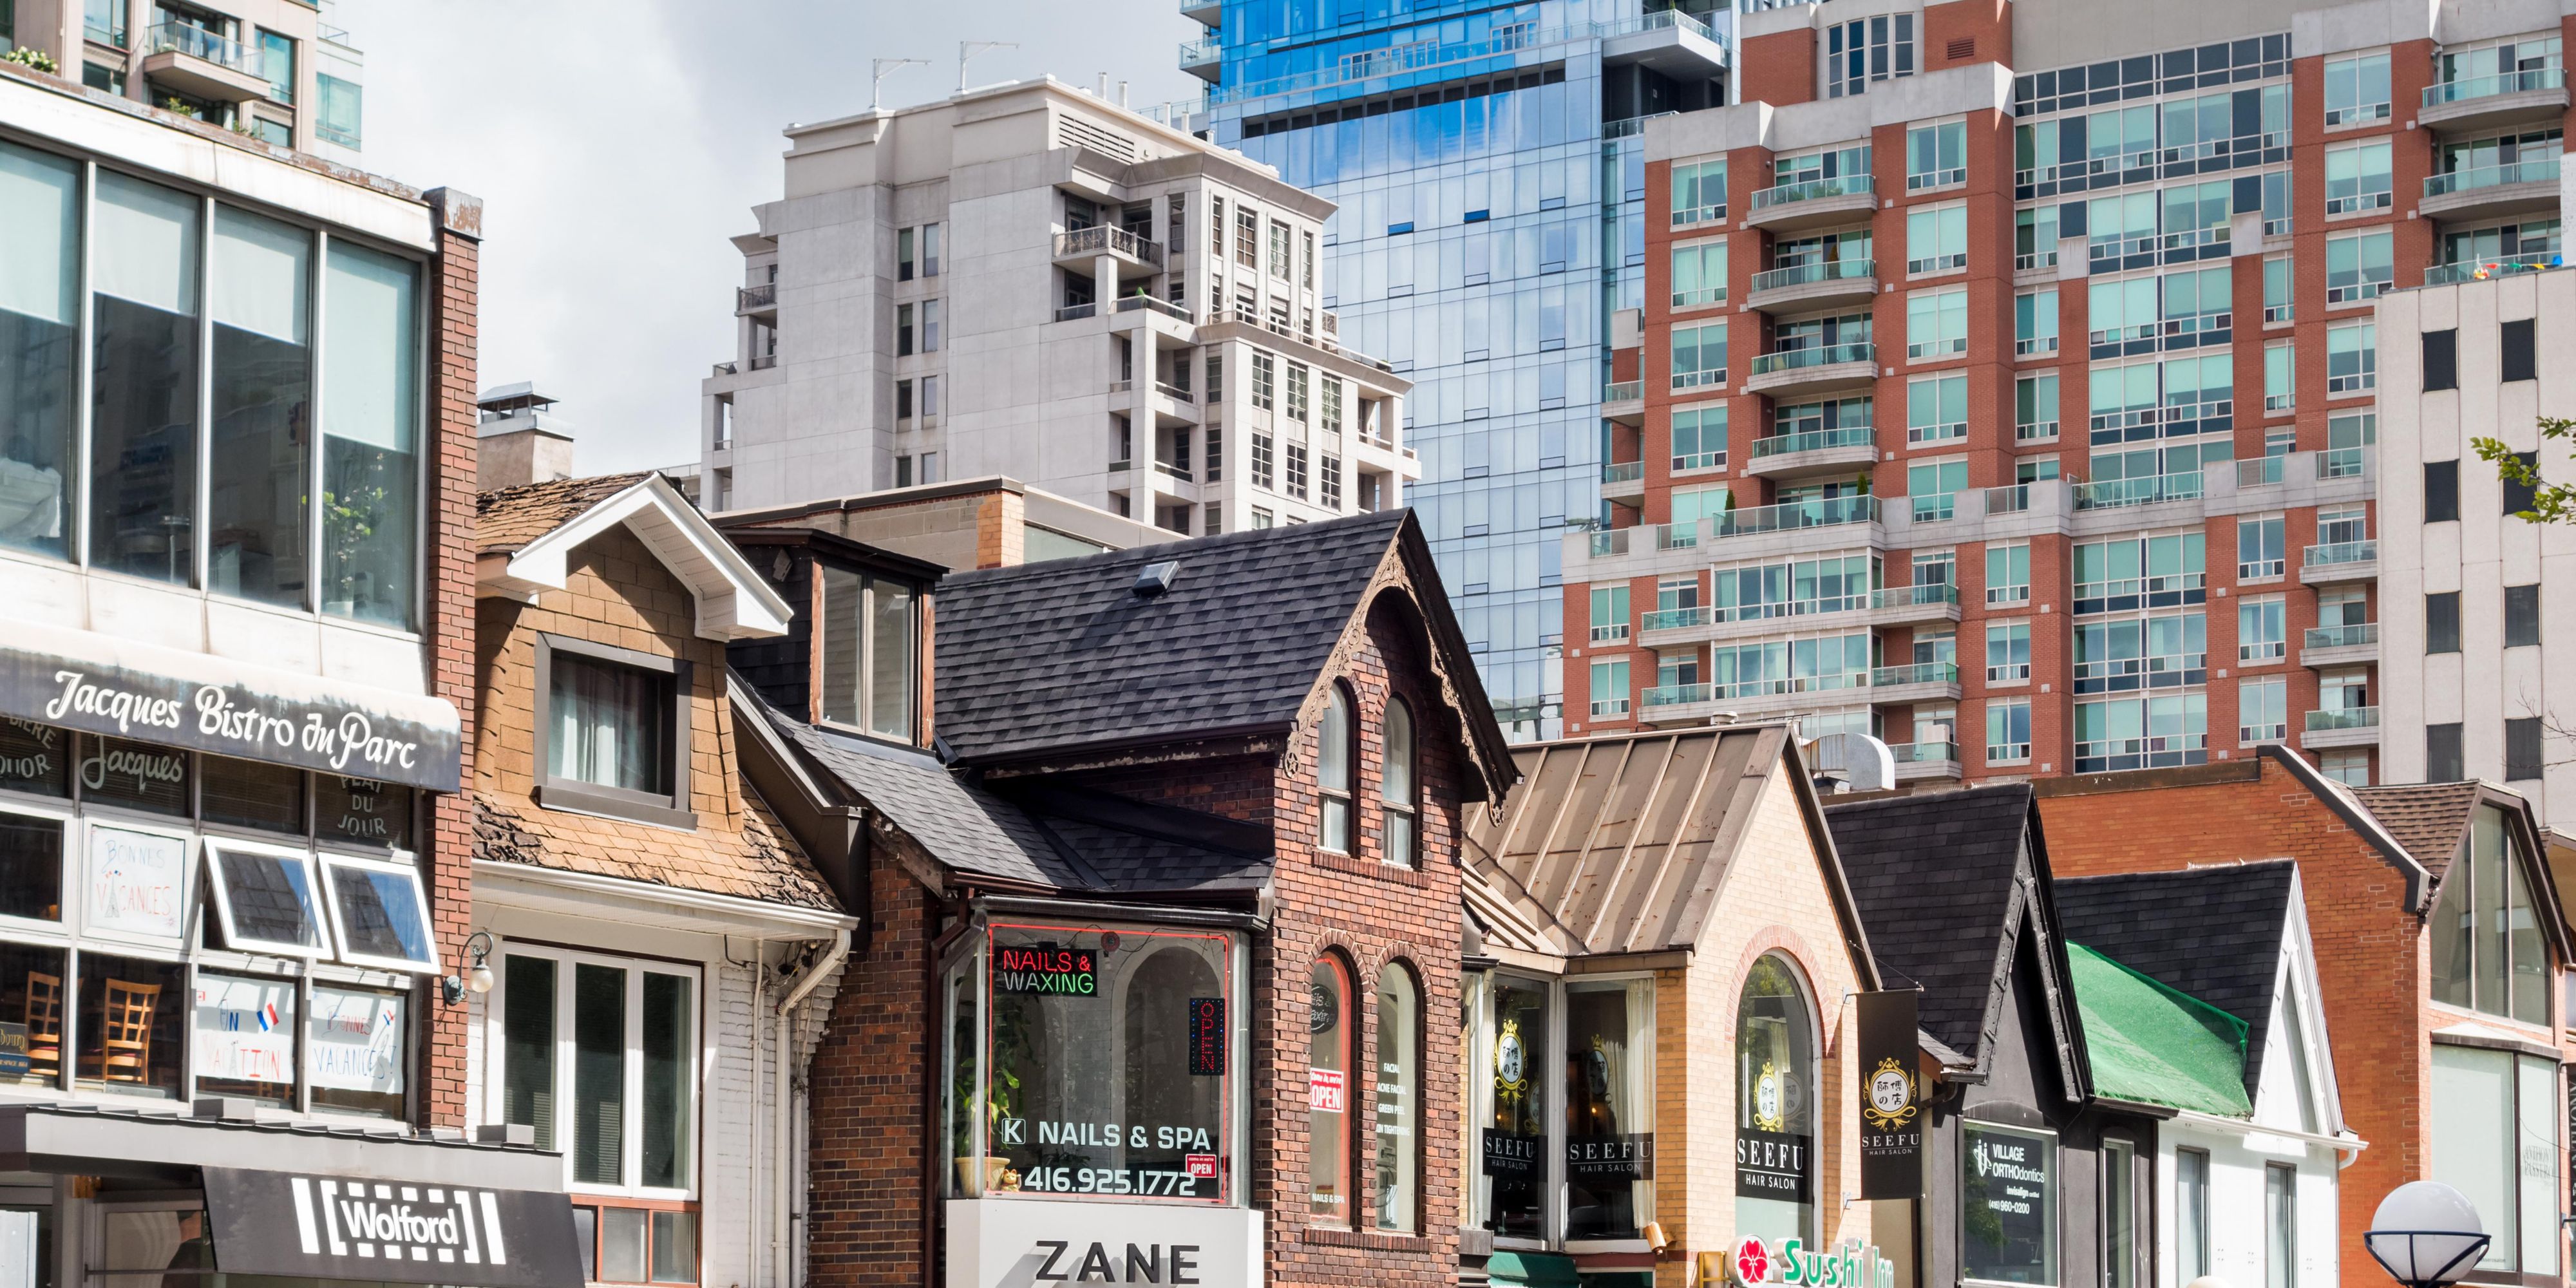 Yorkville is the destination for anyone looking to indulge in a little retail therapy. The neighbourhood is a combination of upscale designer shops, posh boutiques, swanky spas and buzzy restaurants. Wander beyond the shopping promenades in order to ogle Yorkville’s beautiful private residences.